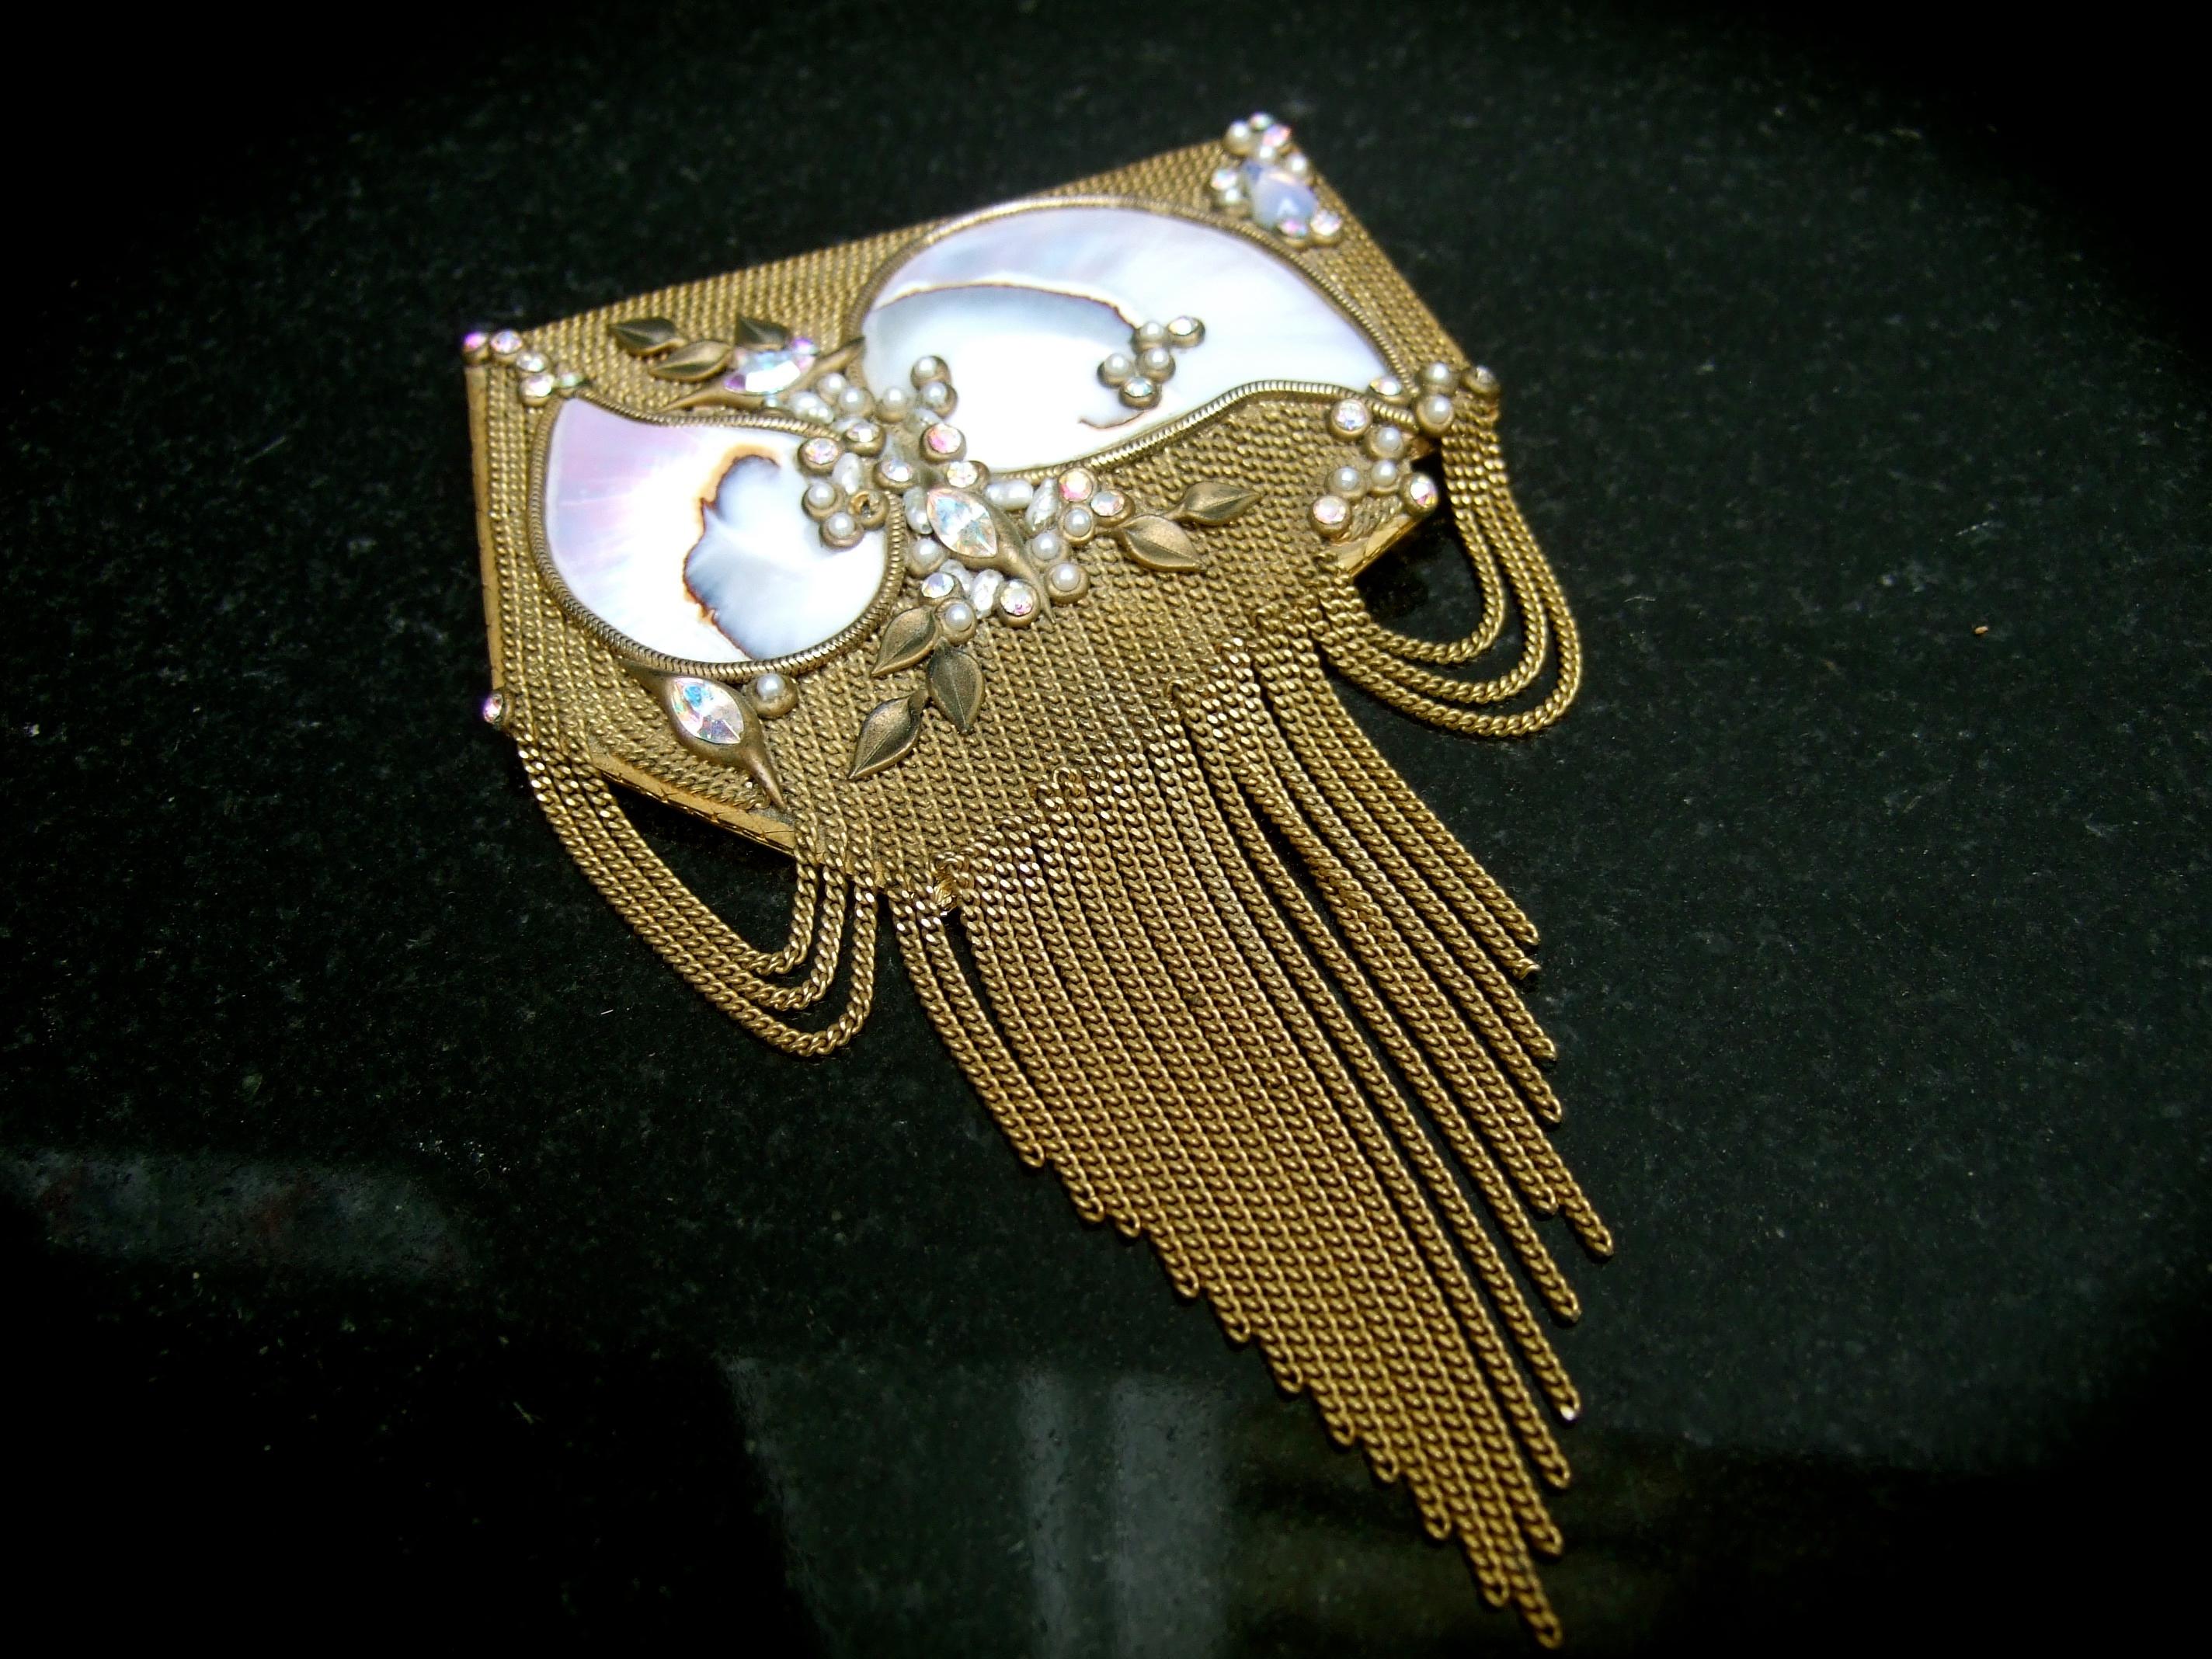 Exquisite mother of pearl massive crystal jeweled gilt metal fringe tassel brooch designed by Marena
The opulent huge scale artisan brooch is adorned with a pair of large polished mother of pearl 
organic shaped tiles

The mother of pearl tiles are